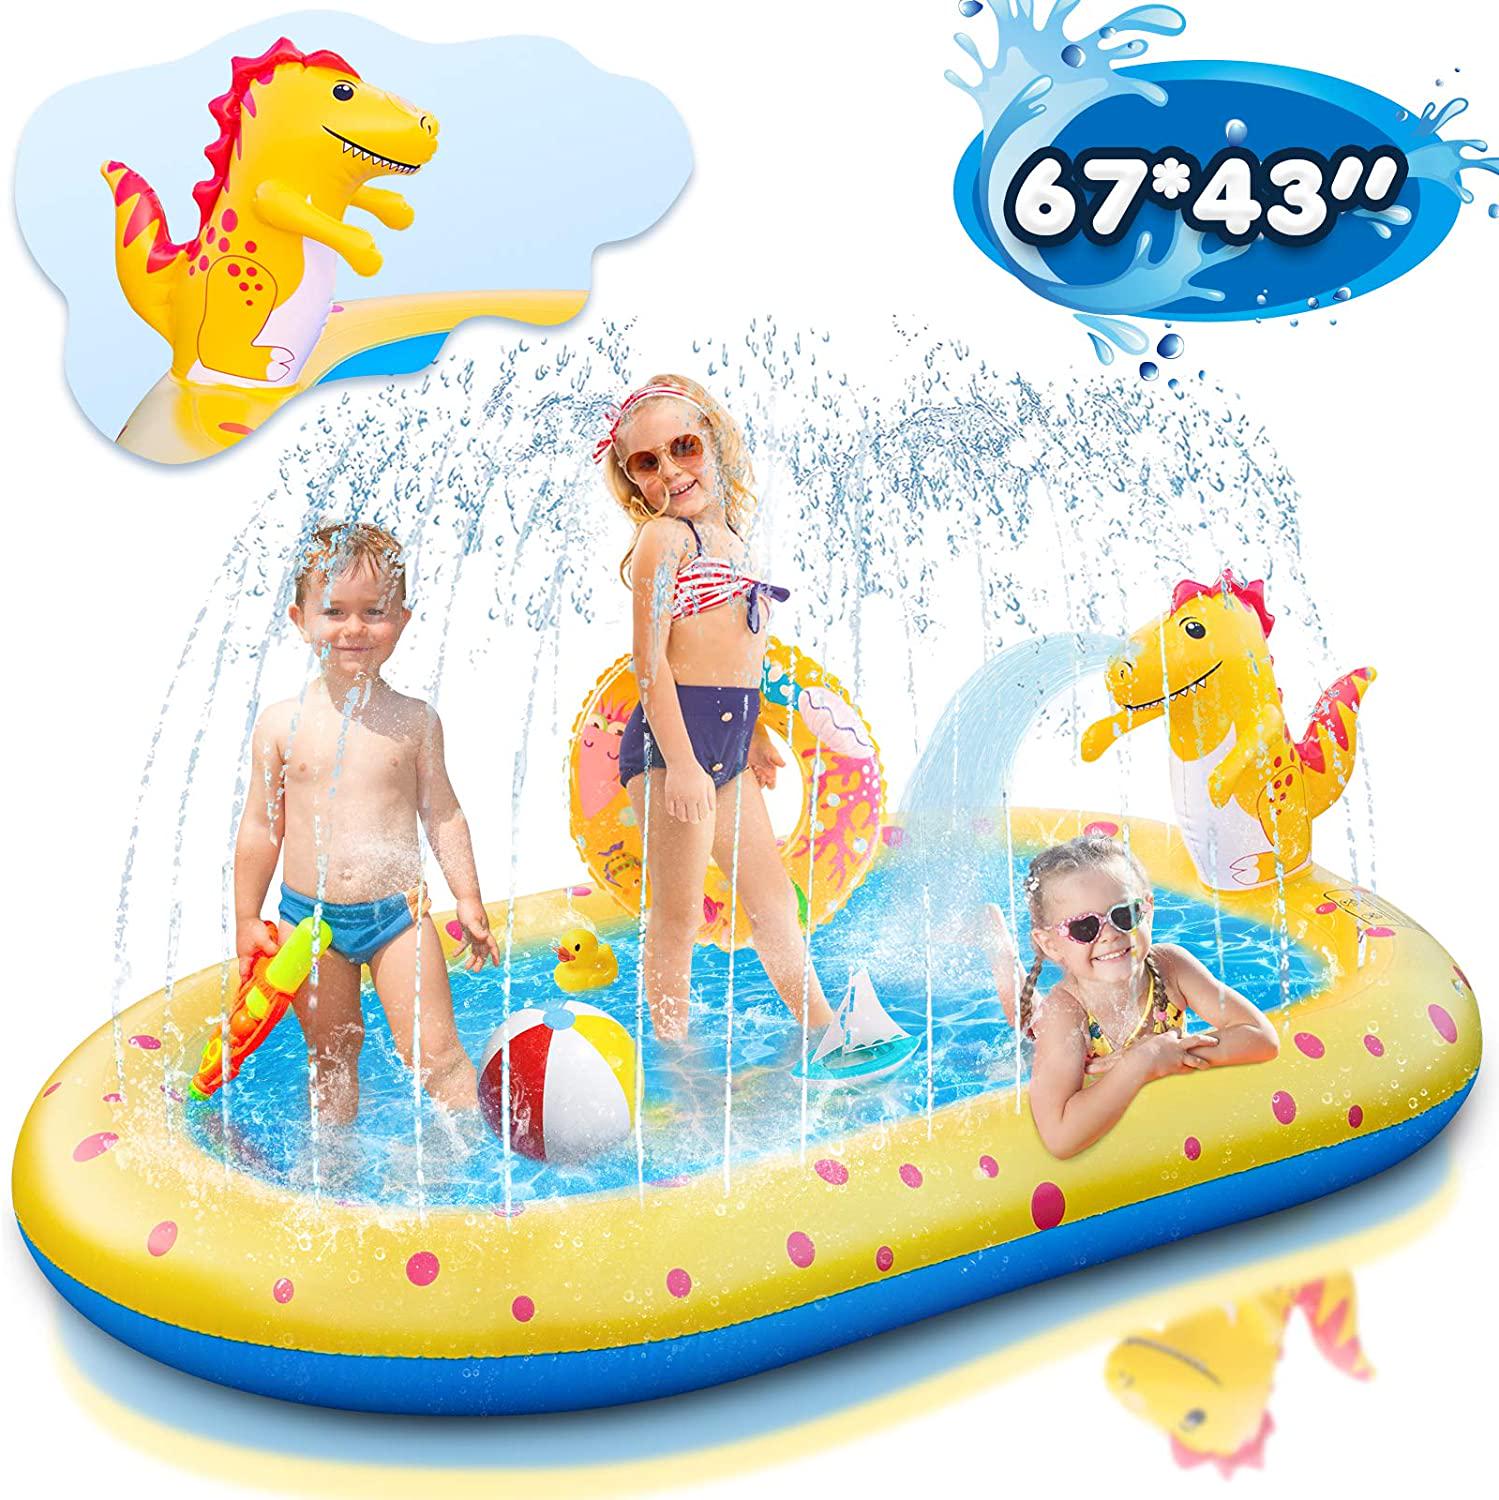 Ksasmile, Kids Pool Splash Pad, Inflatable Sprinkler Pool Splash Mat, Large Inflatable Pool Summer Outdoor Water Toys for Babies Toddlers Girls Boys (67x43 Inch)